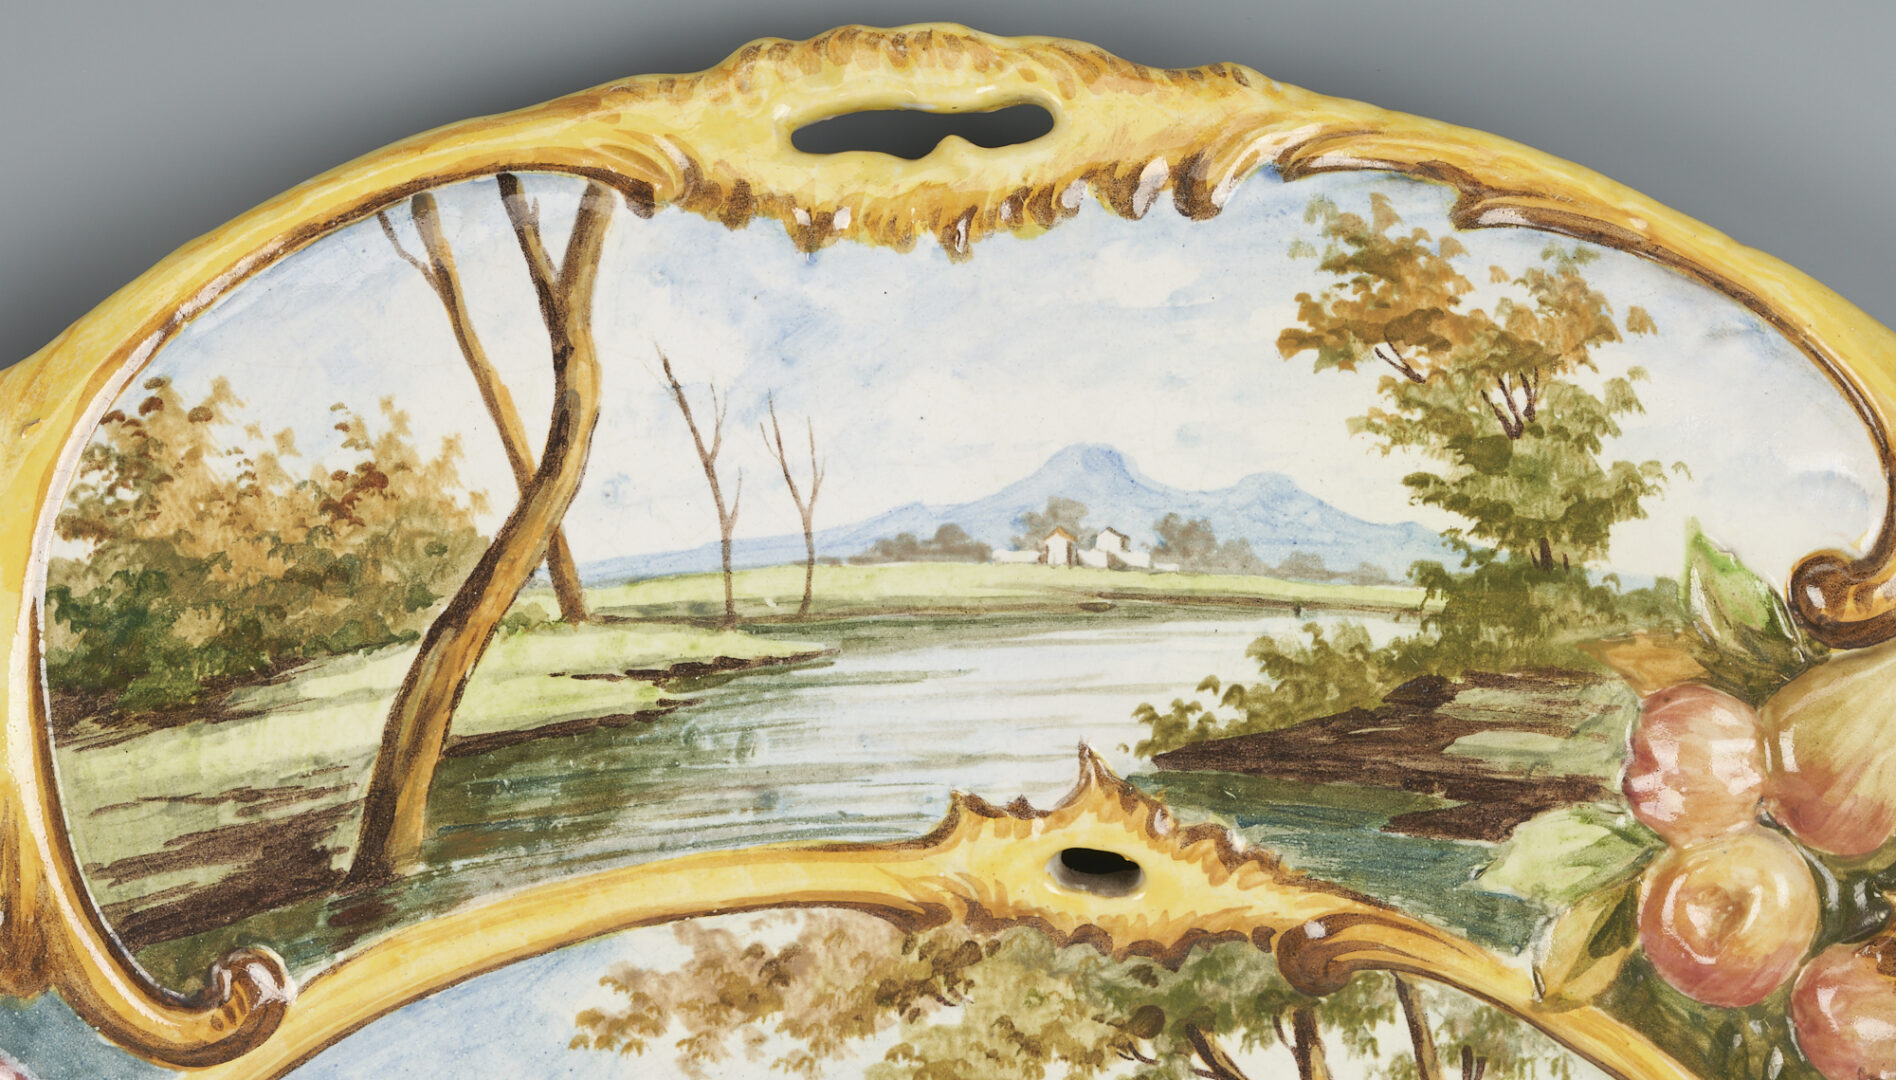 Lot 271: Pair of Very Large Italian Ceramic Chargers with Pastoral Scenes